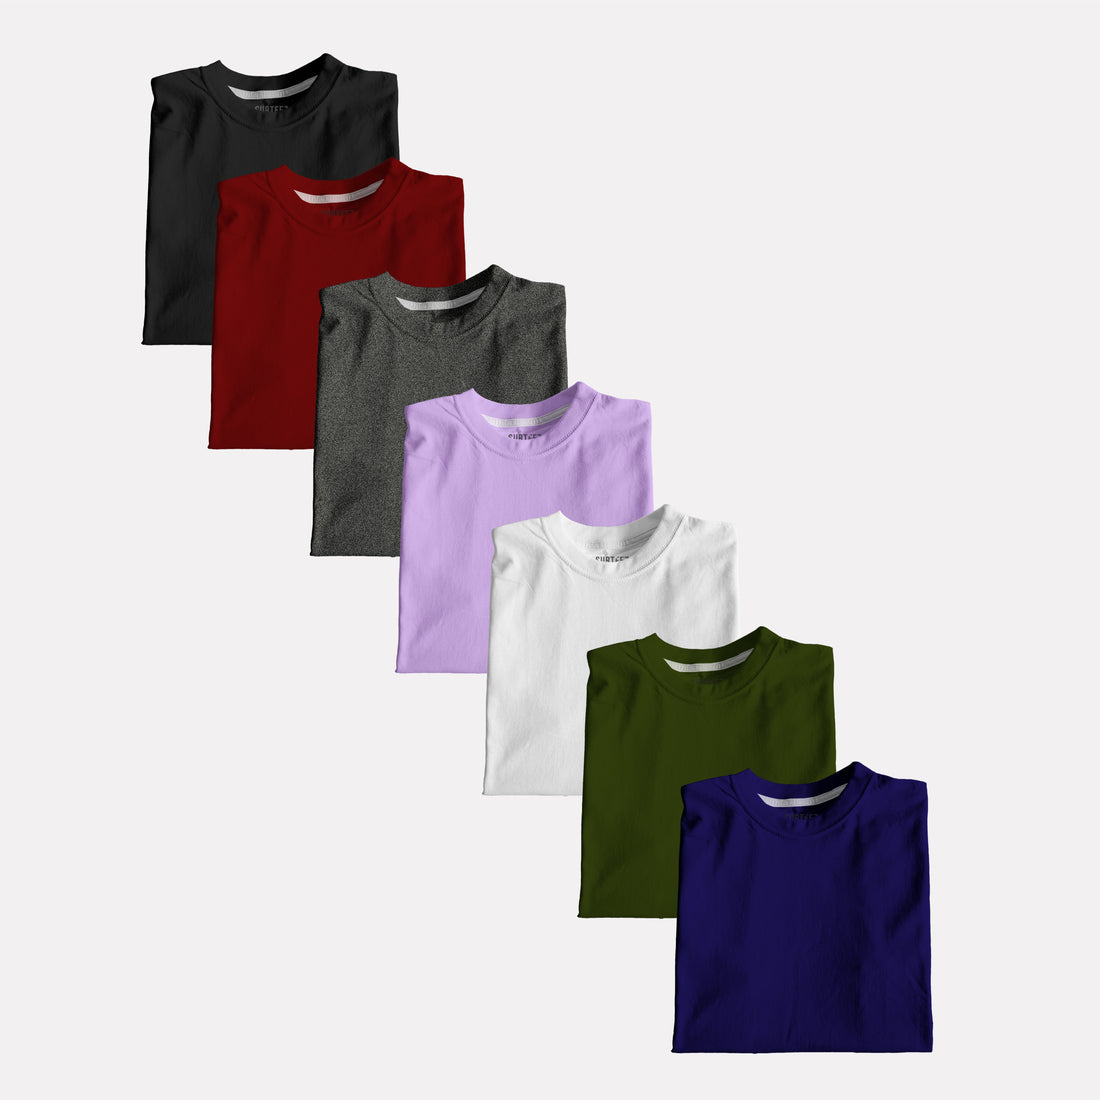 Any Pack of 7 Basic Tees